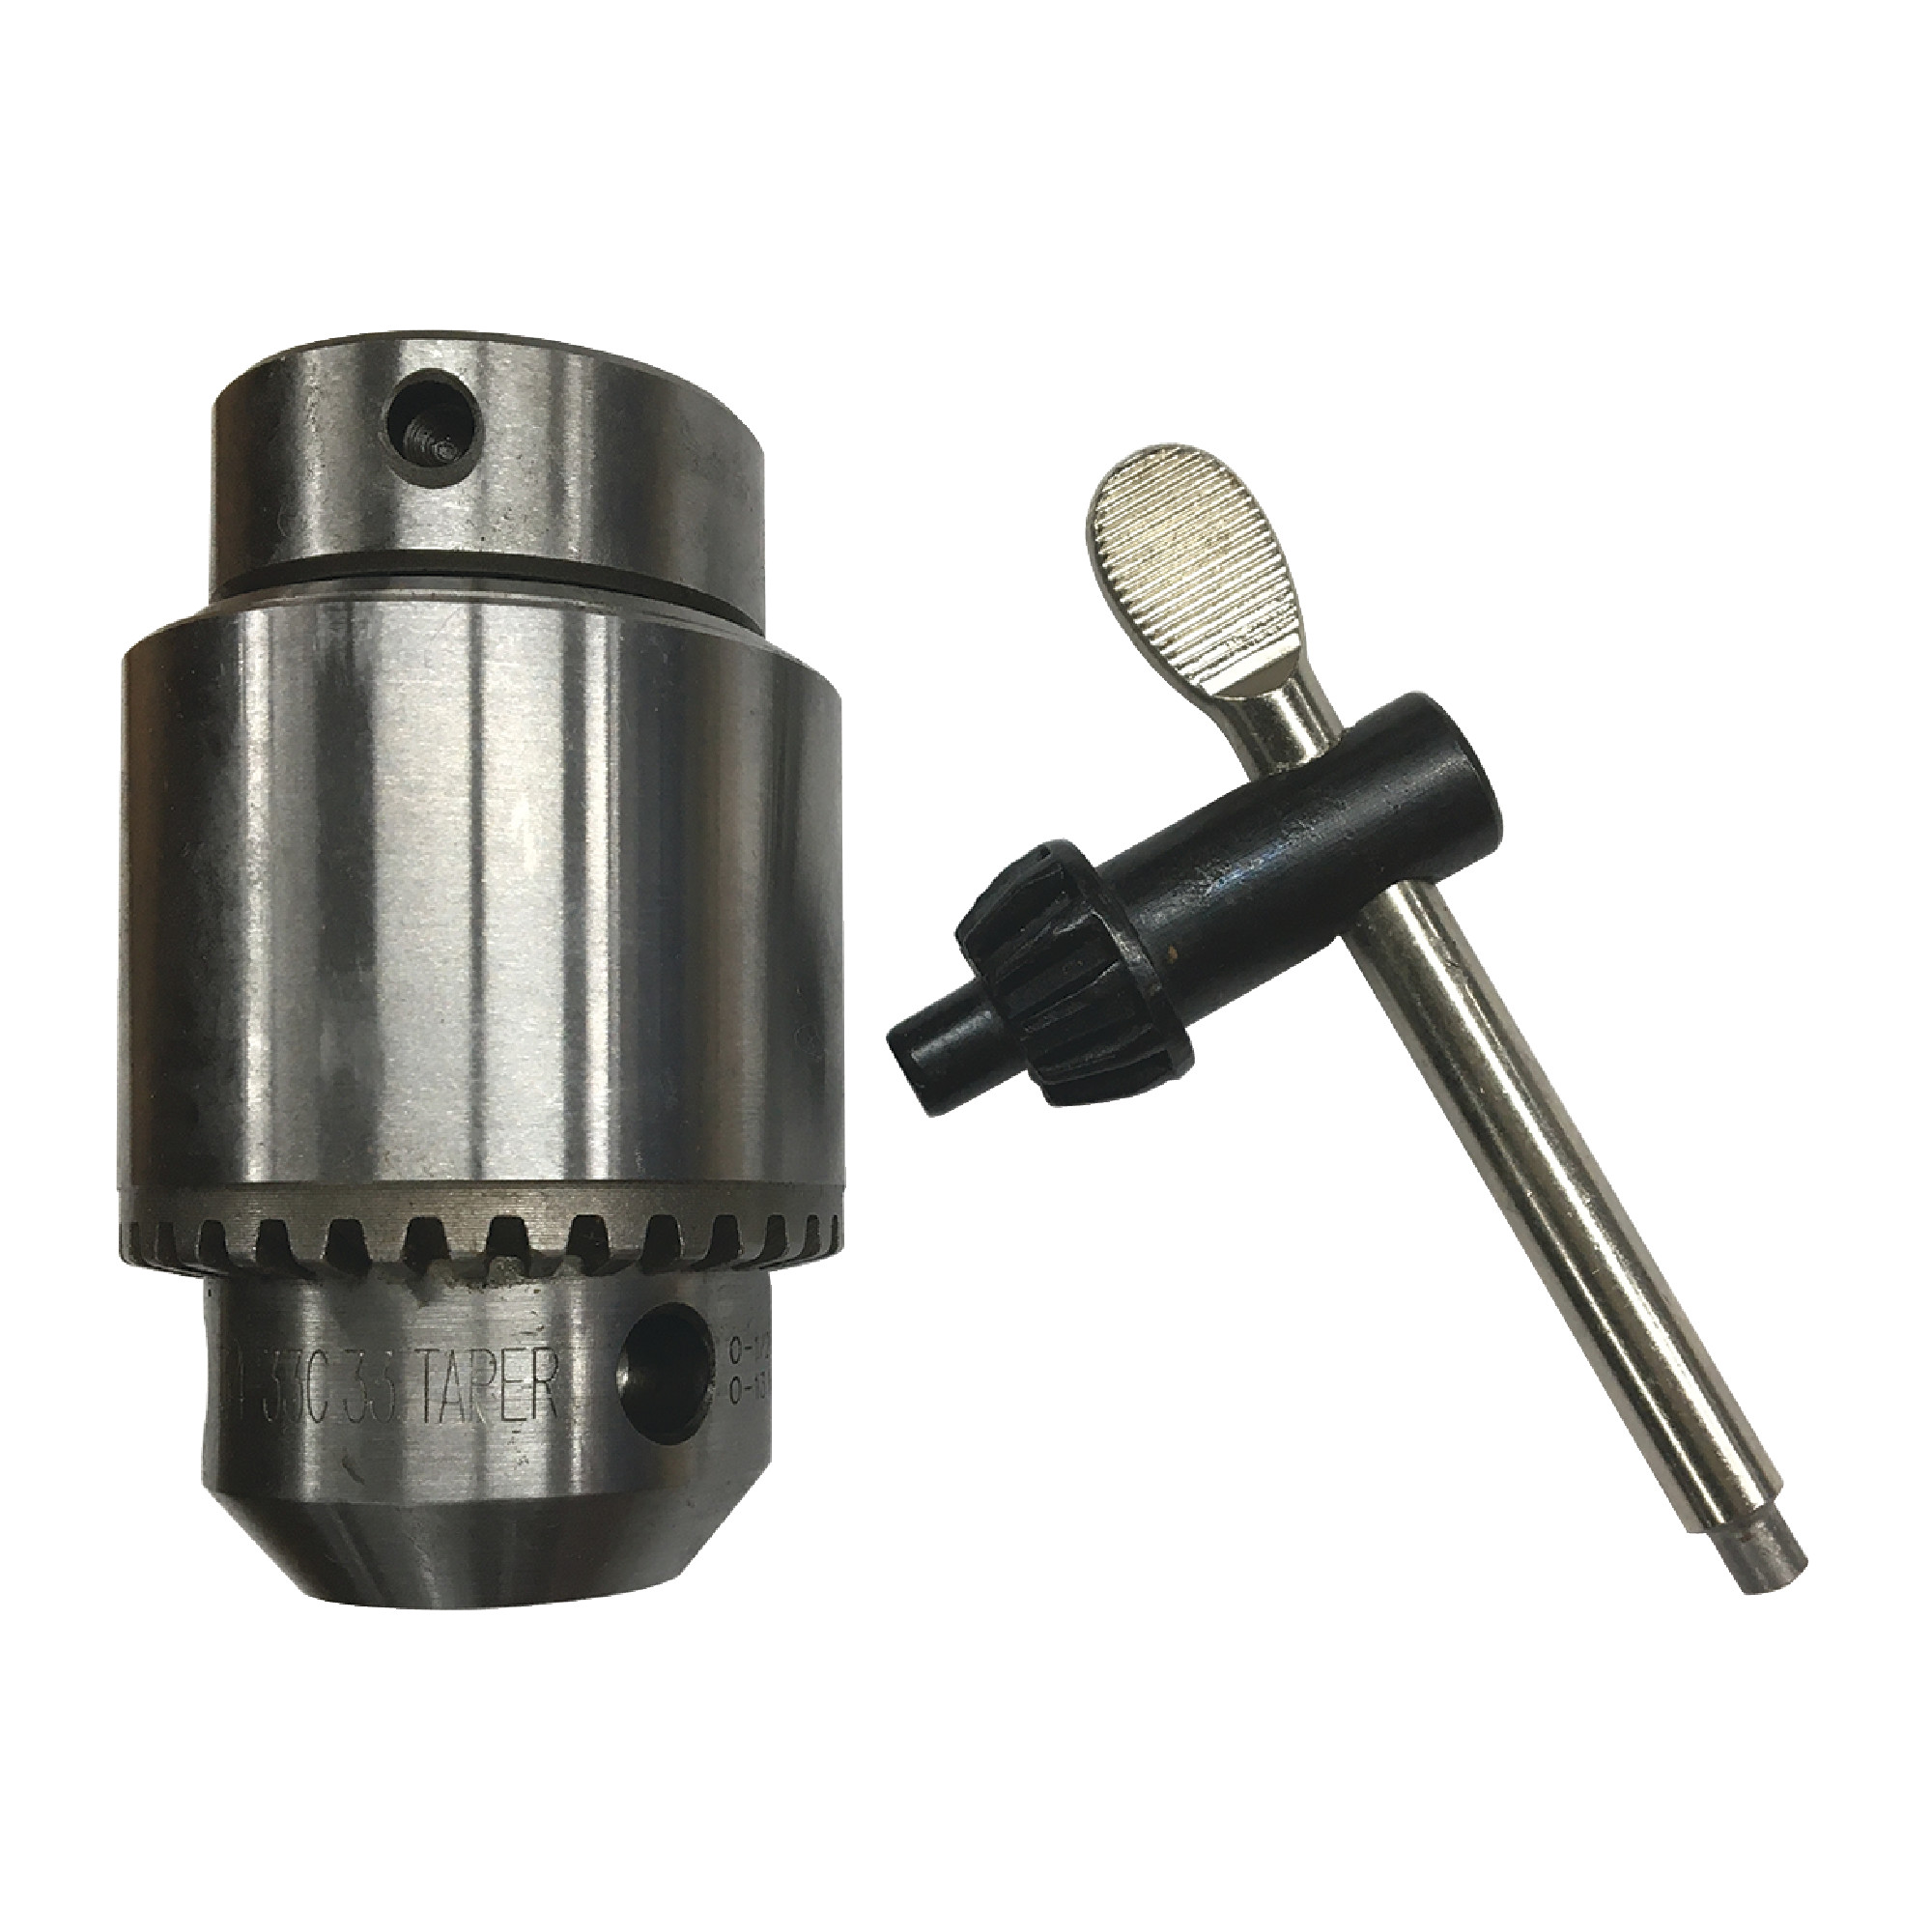 Plain Bearing Drill Chuck With Threaded Collar For Older Rockwell Drill Presses